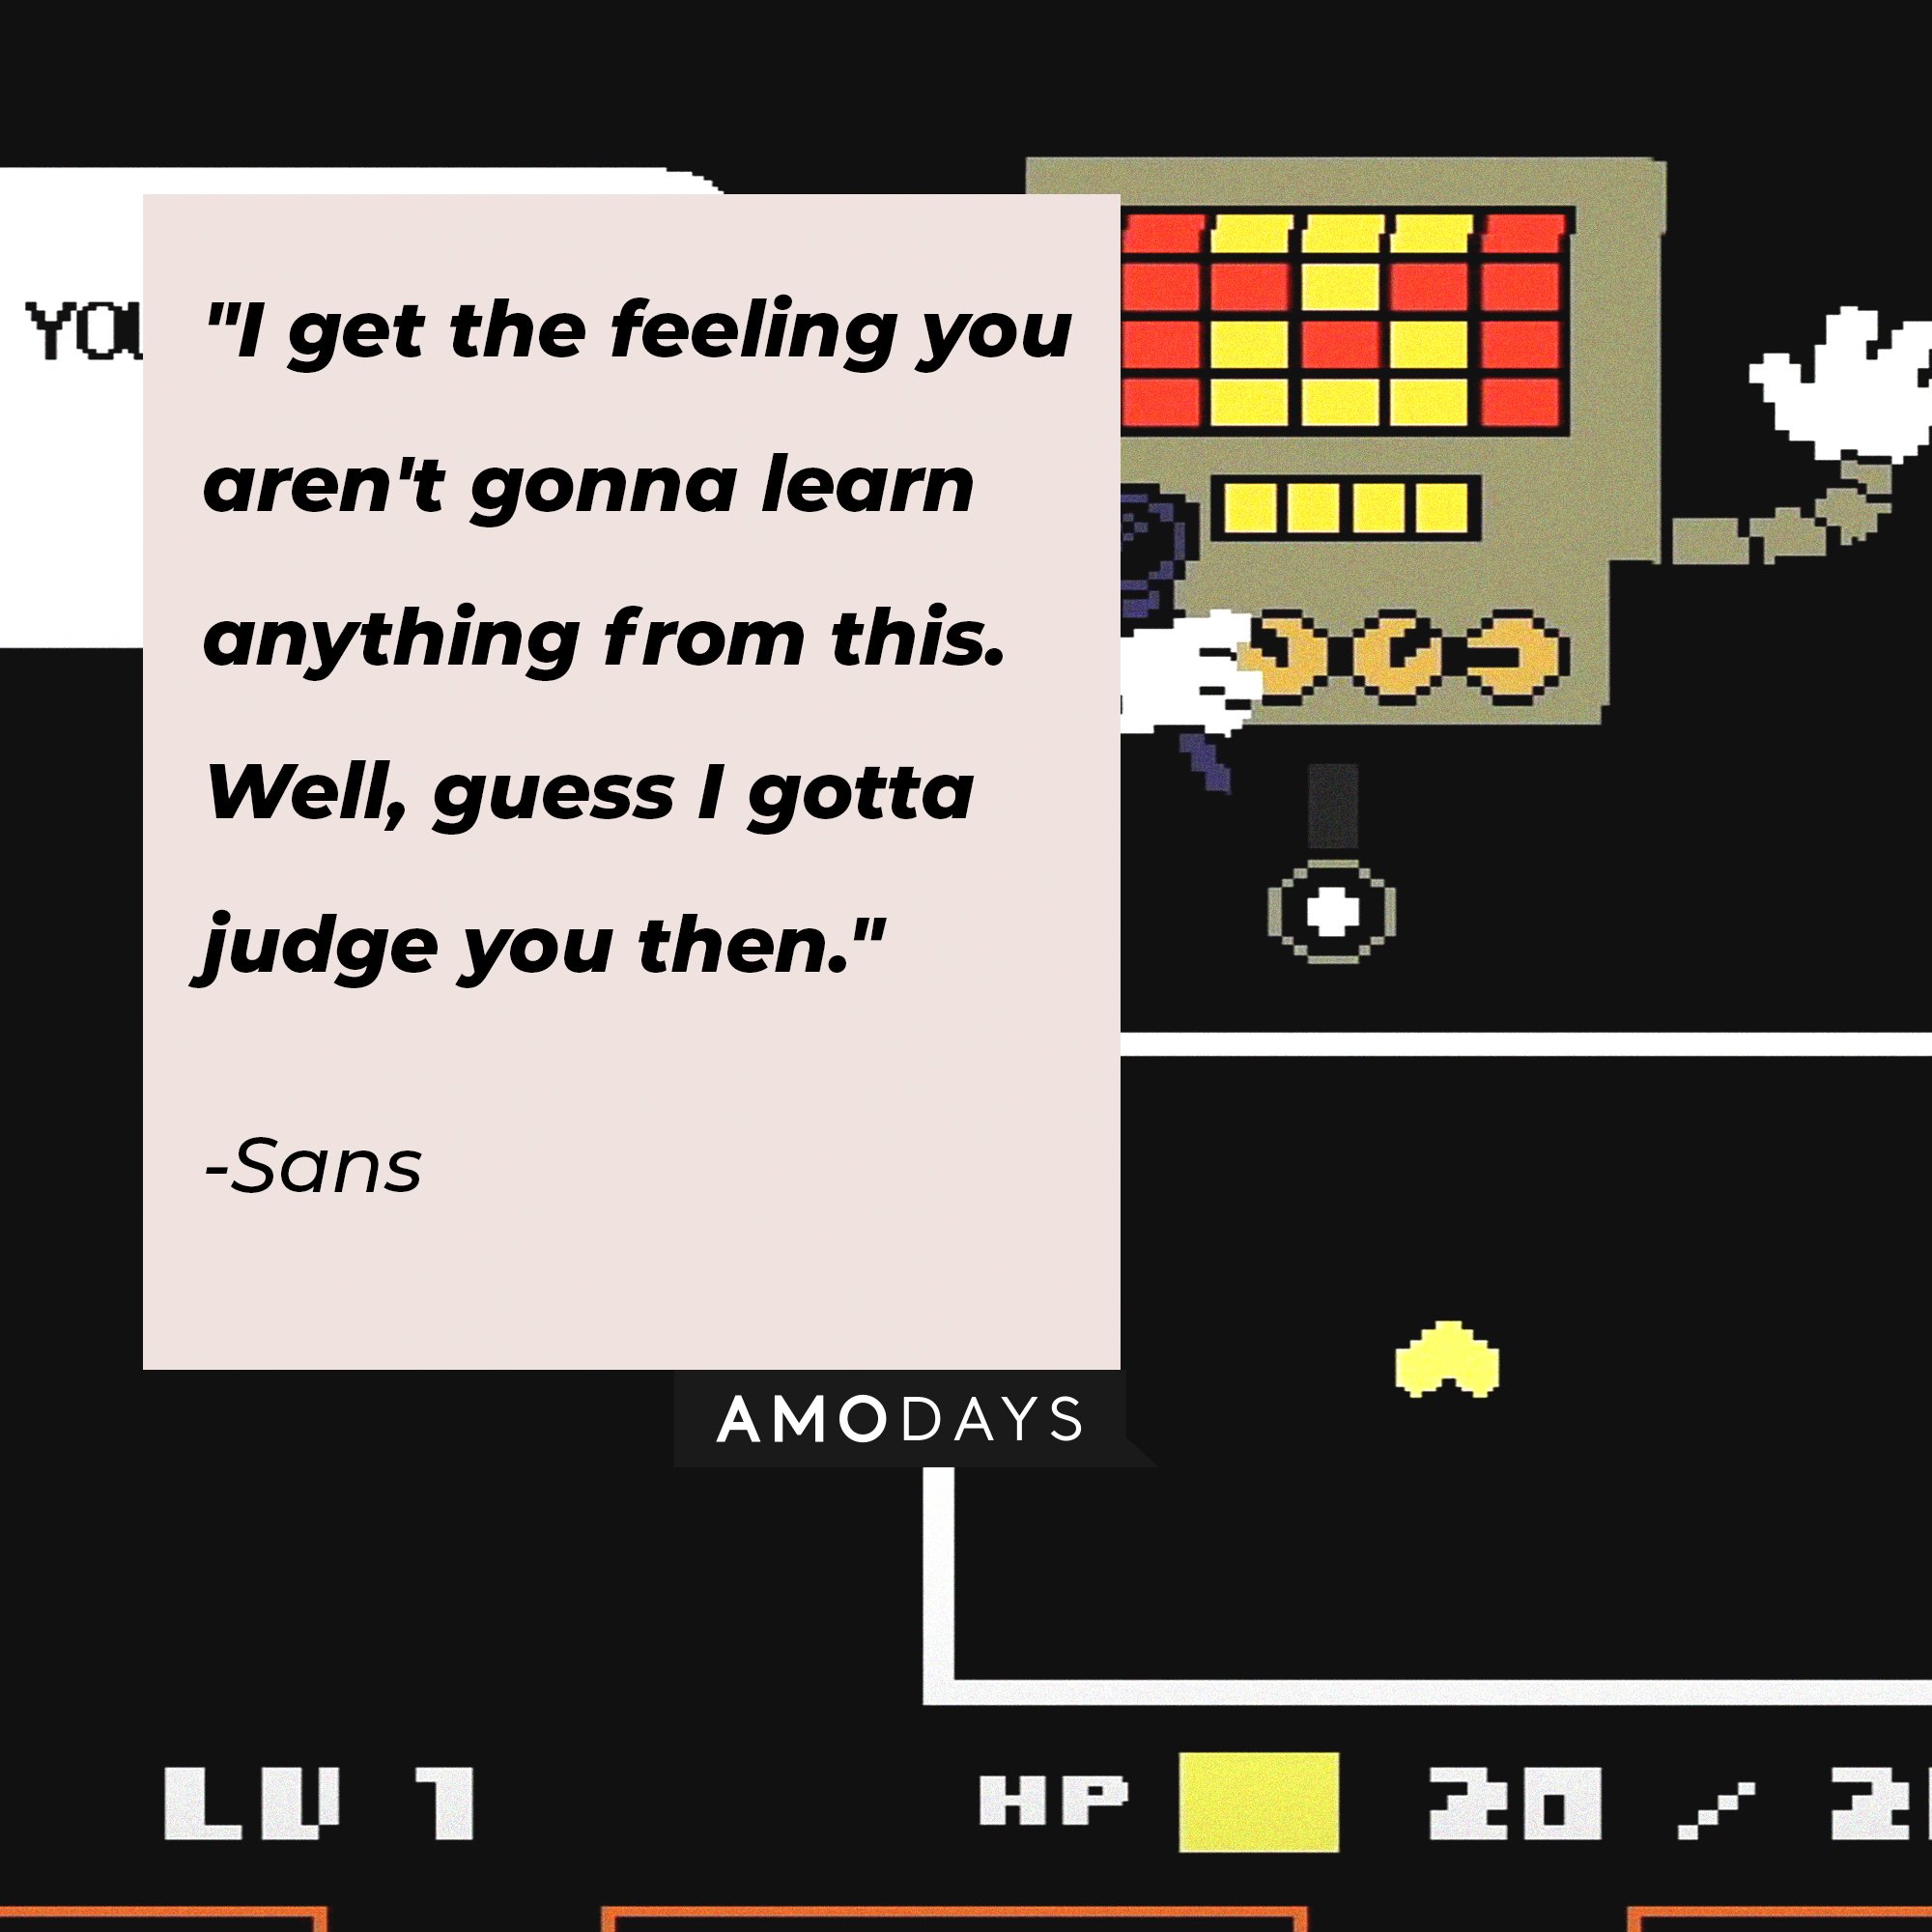 Sans’ quote: "I get the feeling you aren't gonna learn anything from this. Well, guess I gotta judge you then." | Image: AmoDays